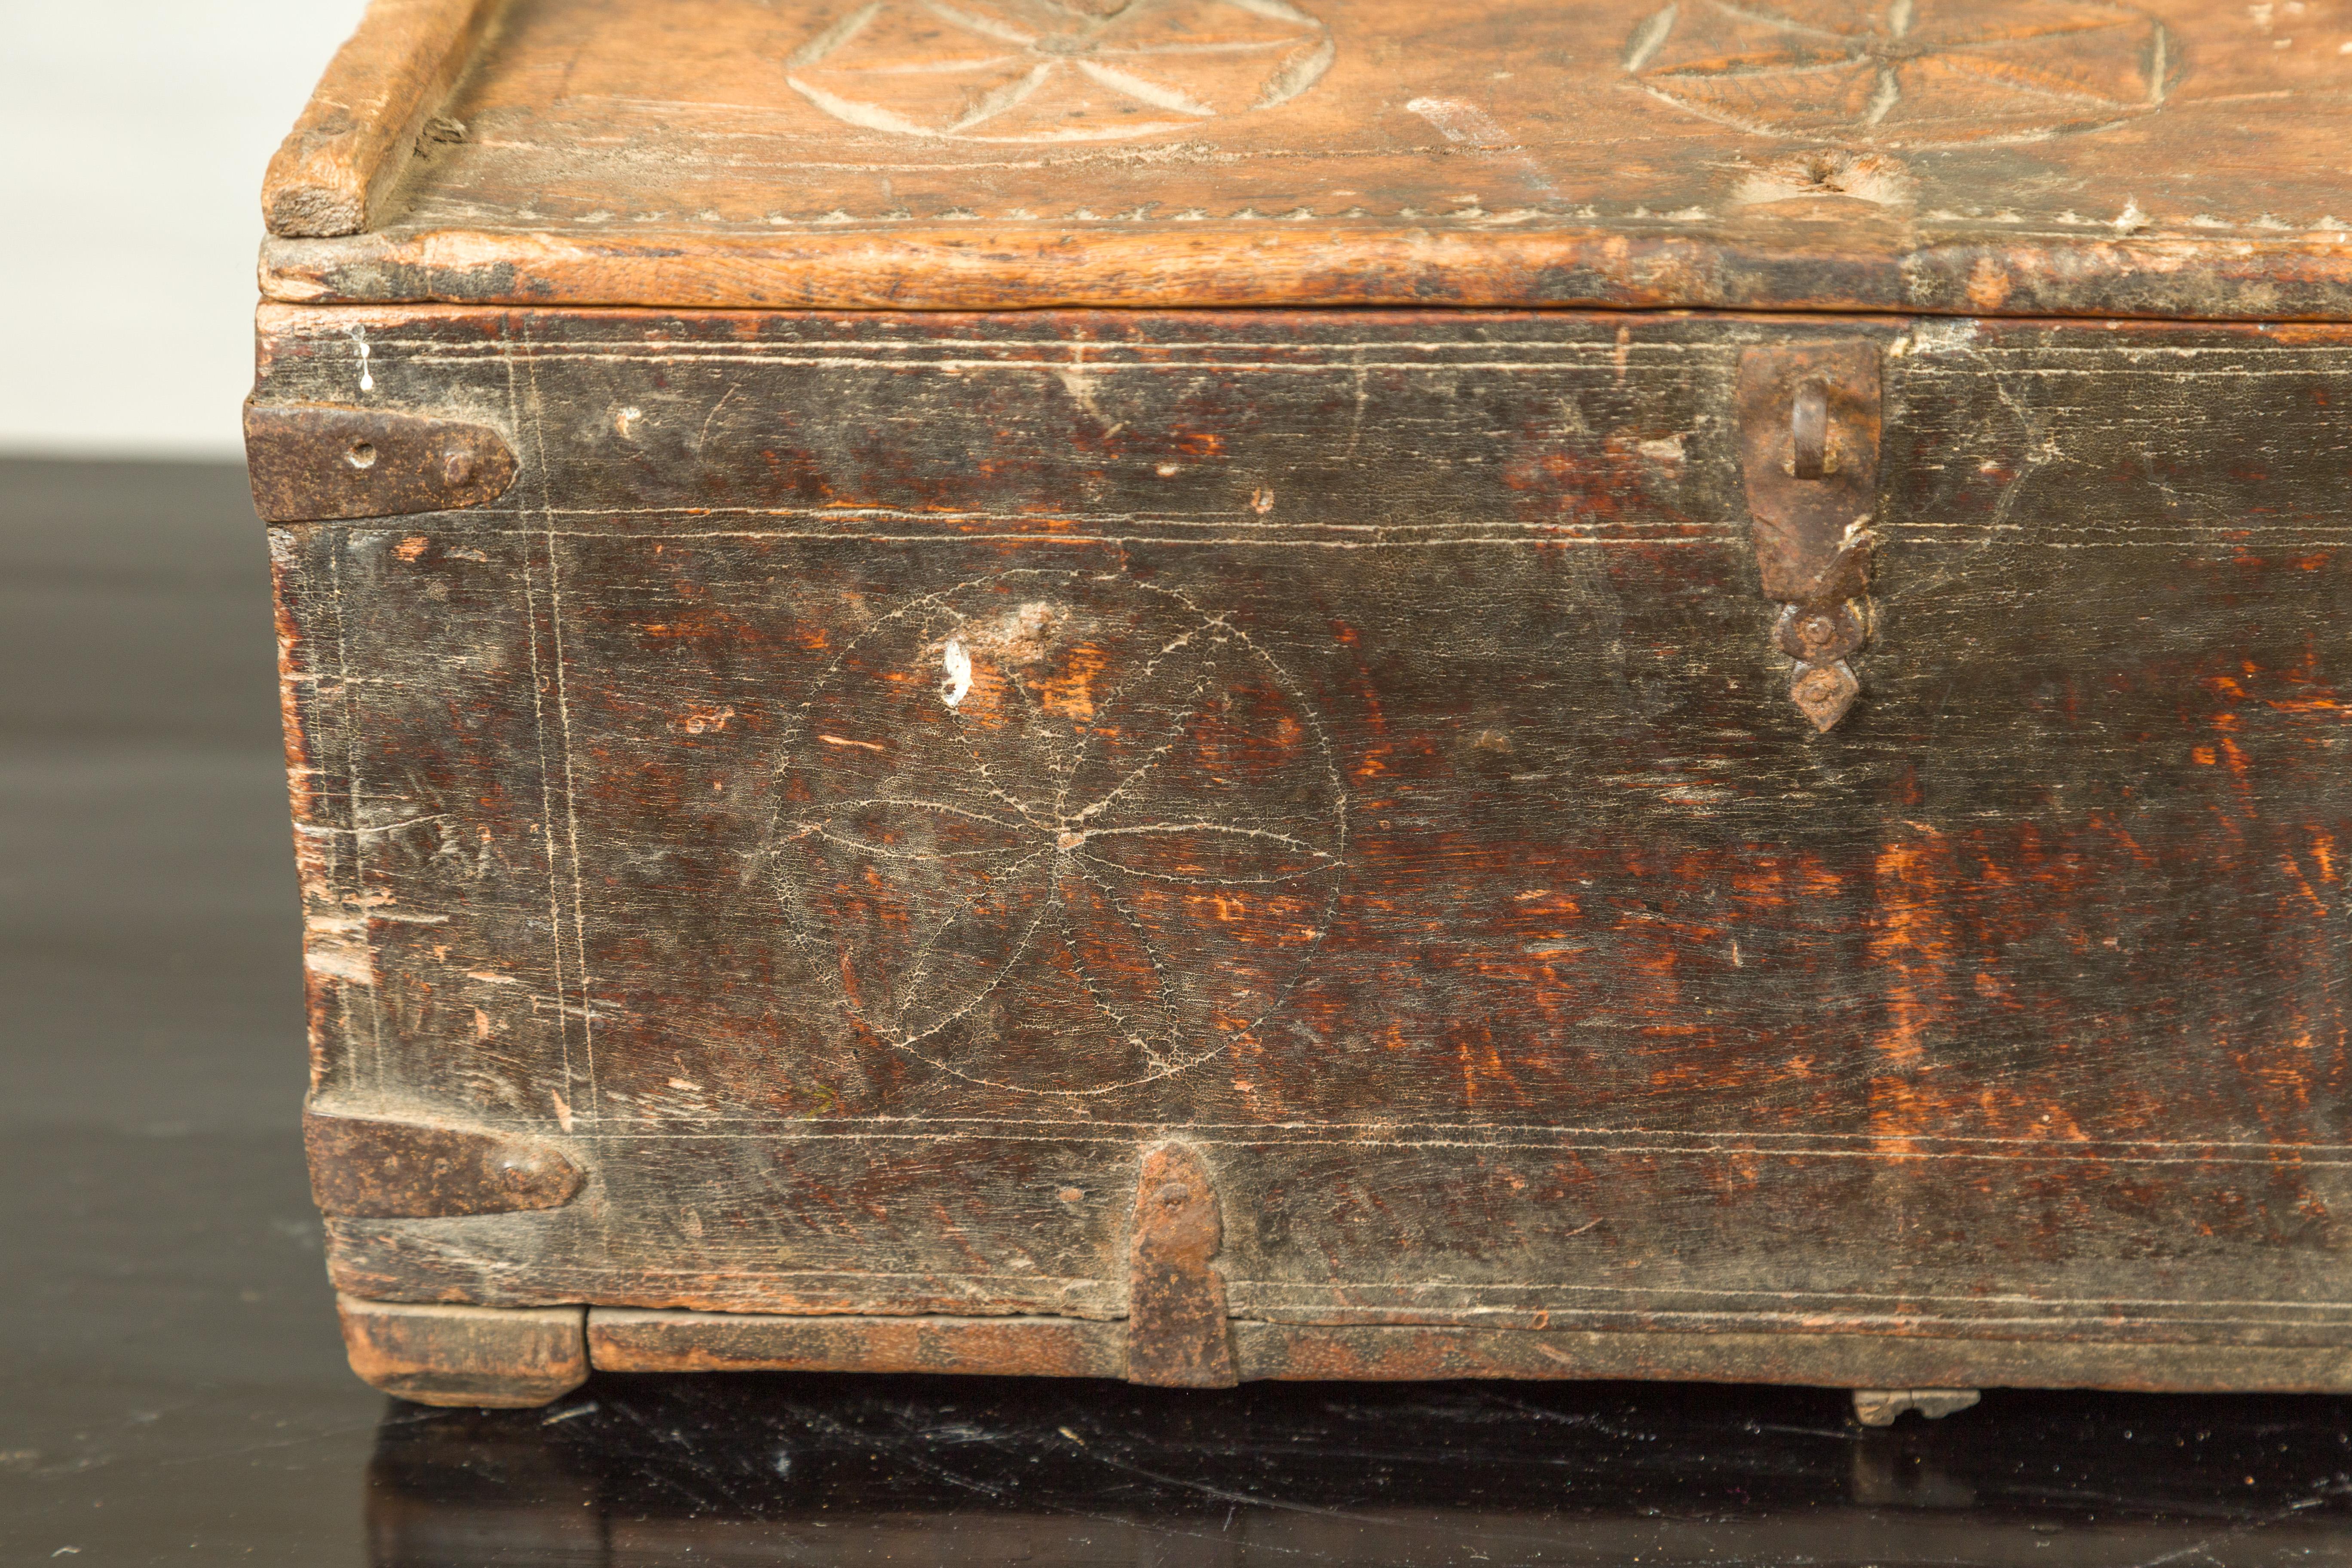 Indian Antique Wooden Dowry Box with Geometric Motifs and Weathered Patina In Fair Condition For Sale In Yonkers, NY